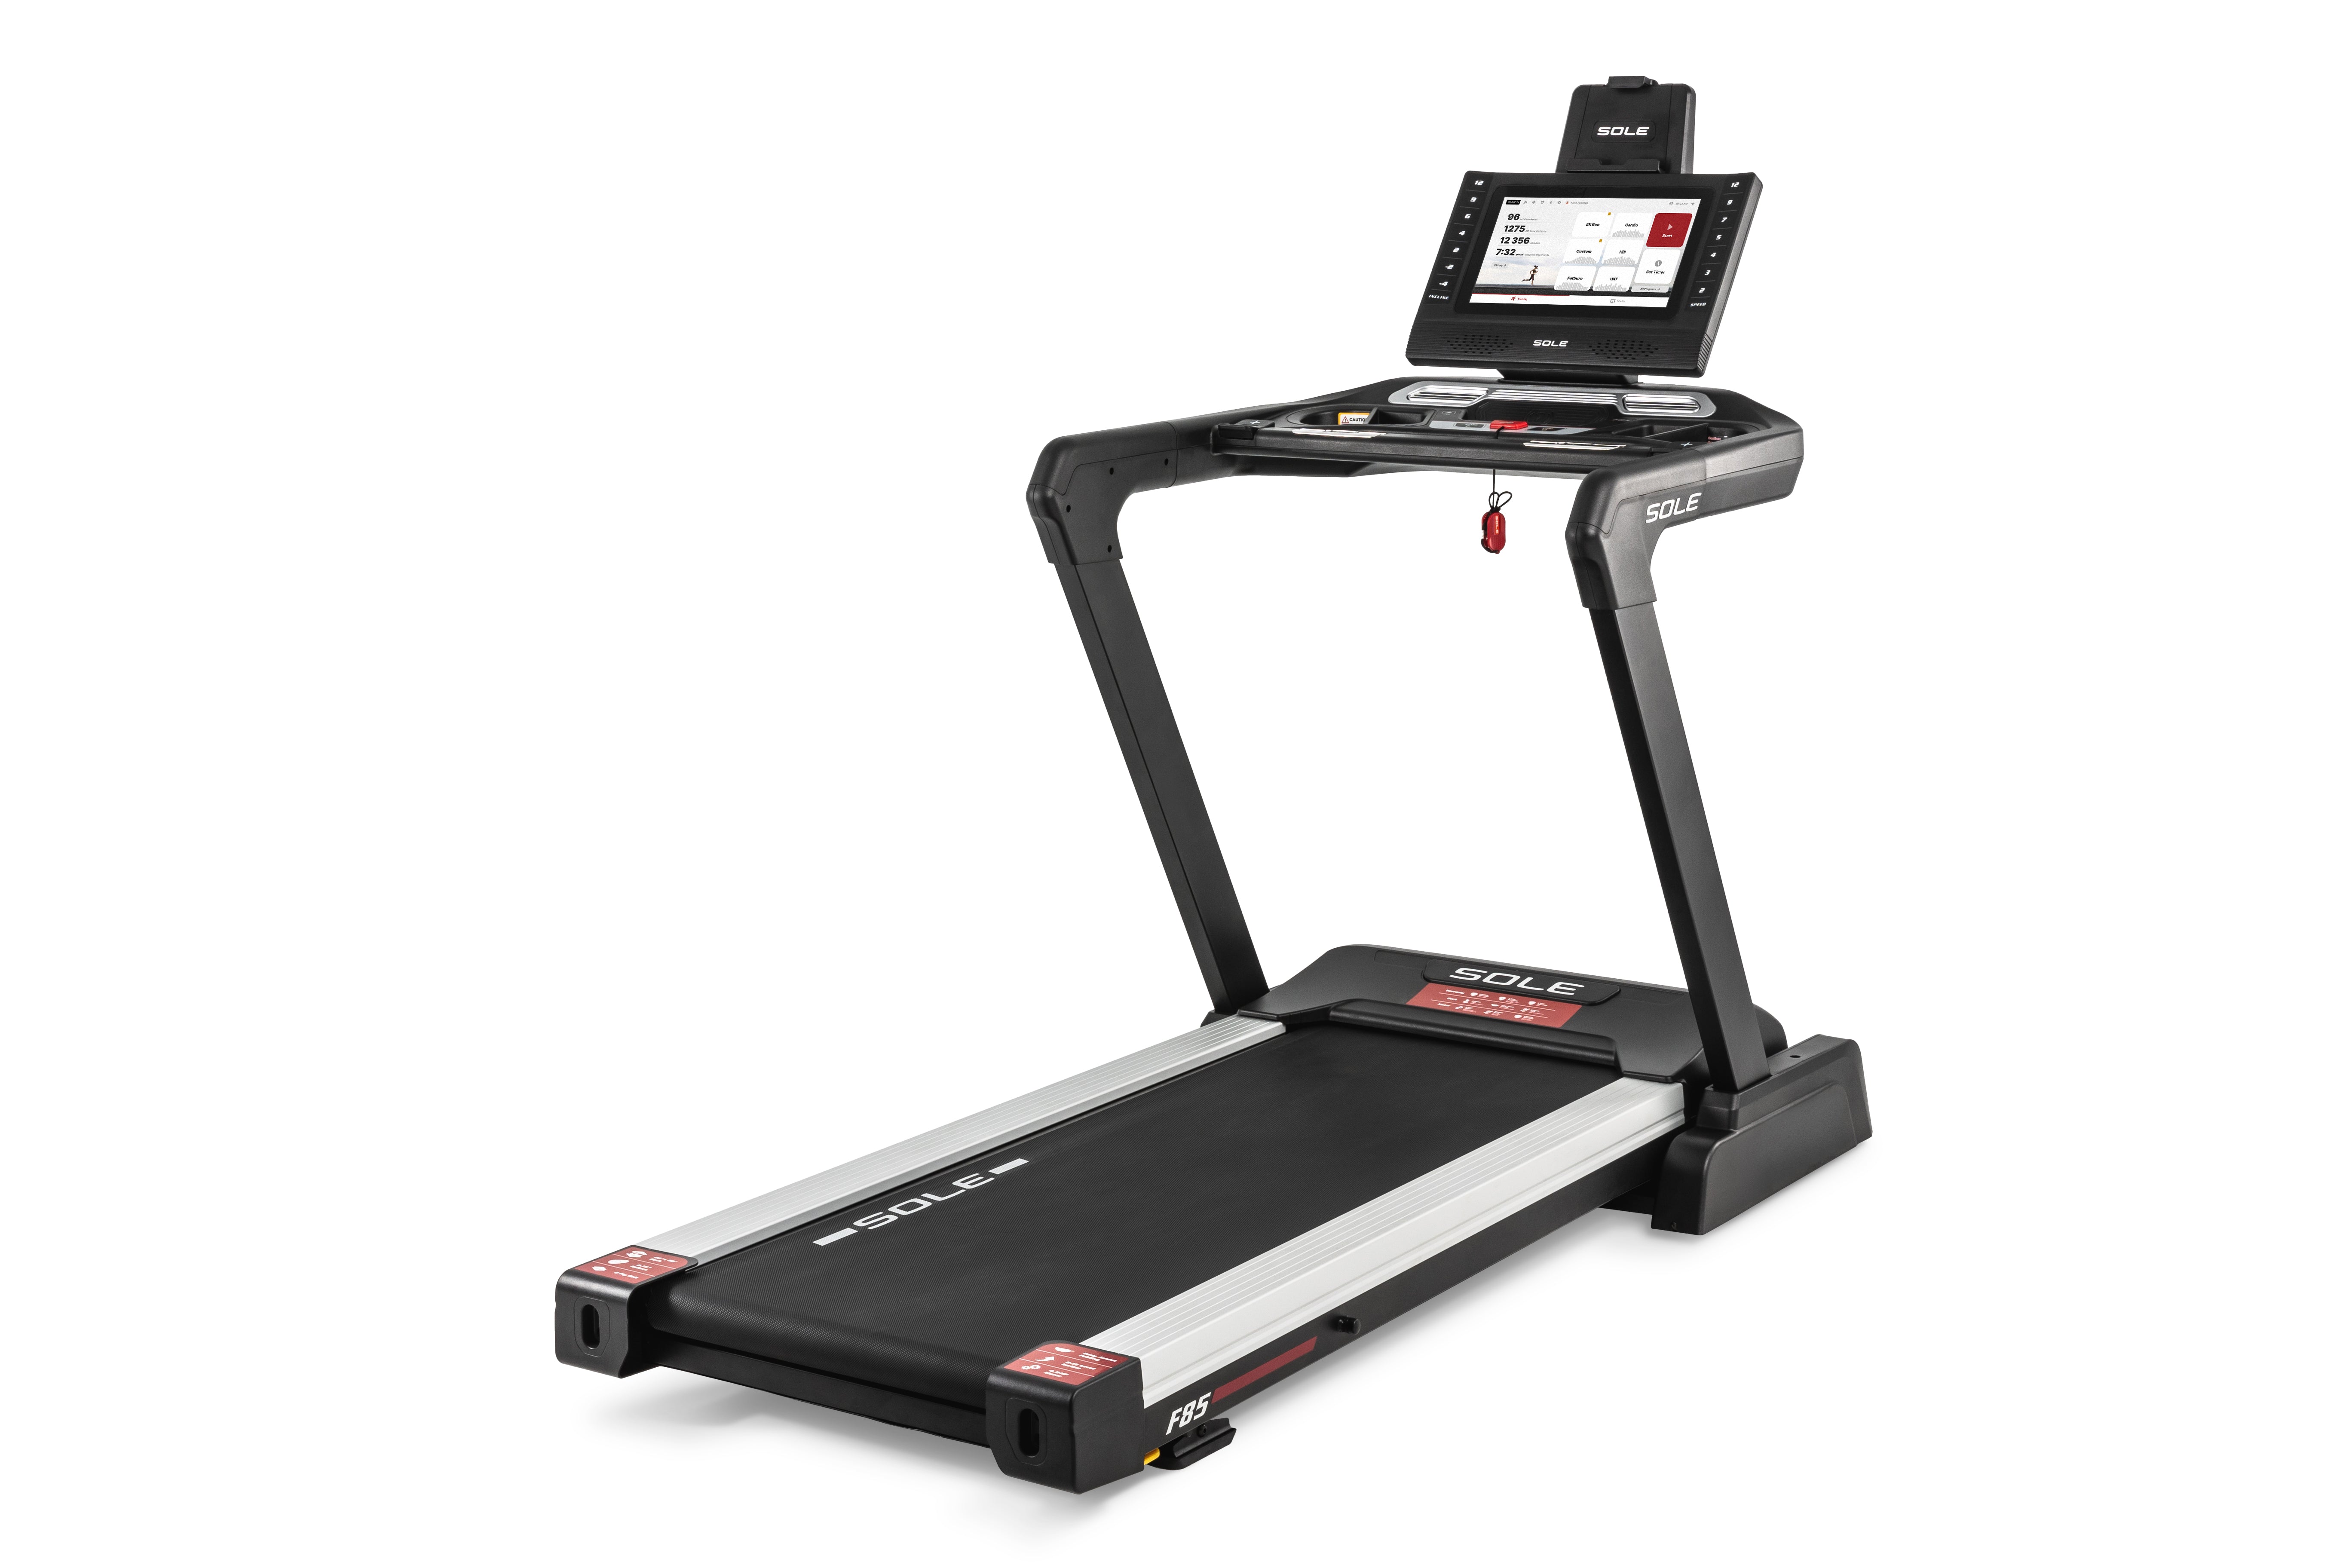 Side view of the Sole F85 treadmill featuring a digital display screen at the top, control panel below it, and the "SOLE" branding on the side railings and treadmill deck. The treadmill has a black and gray design with the "F85" logo on the lower front portion. The running surface is black with white and red accents.